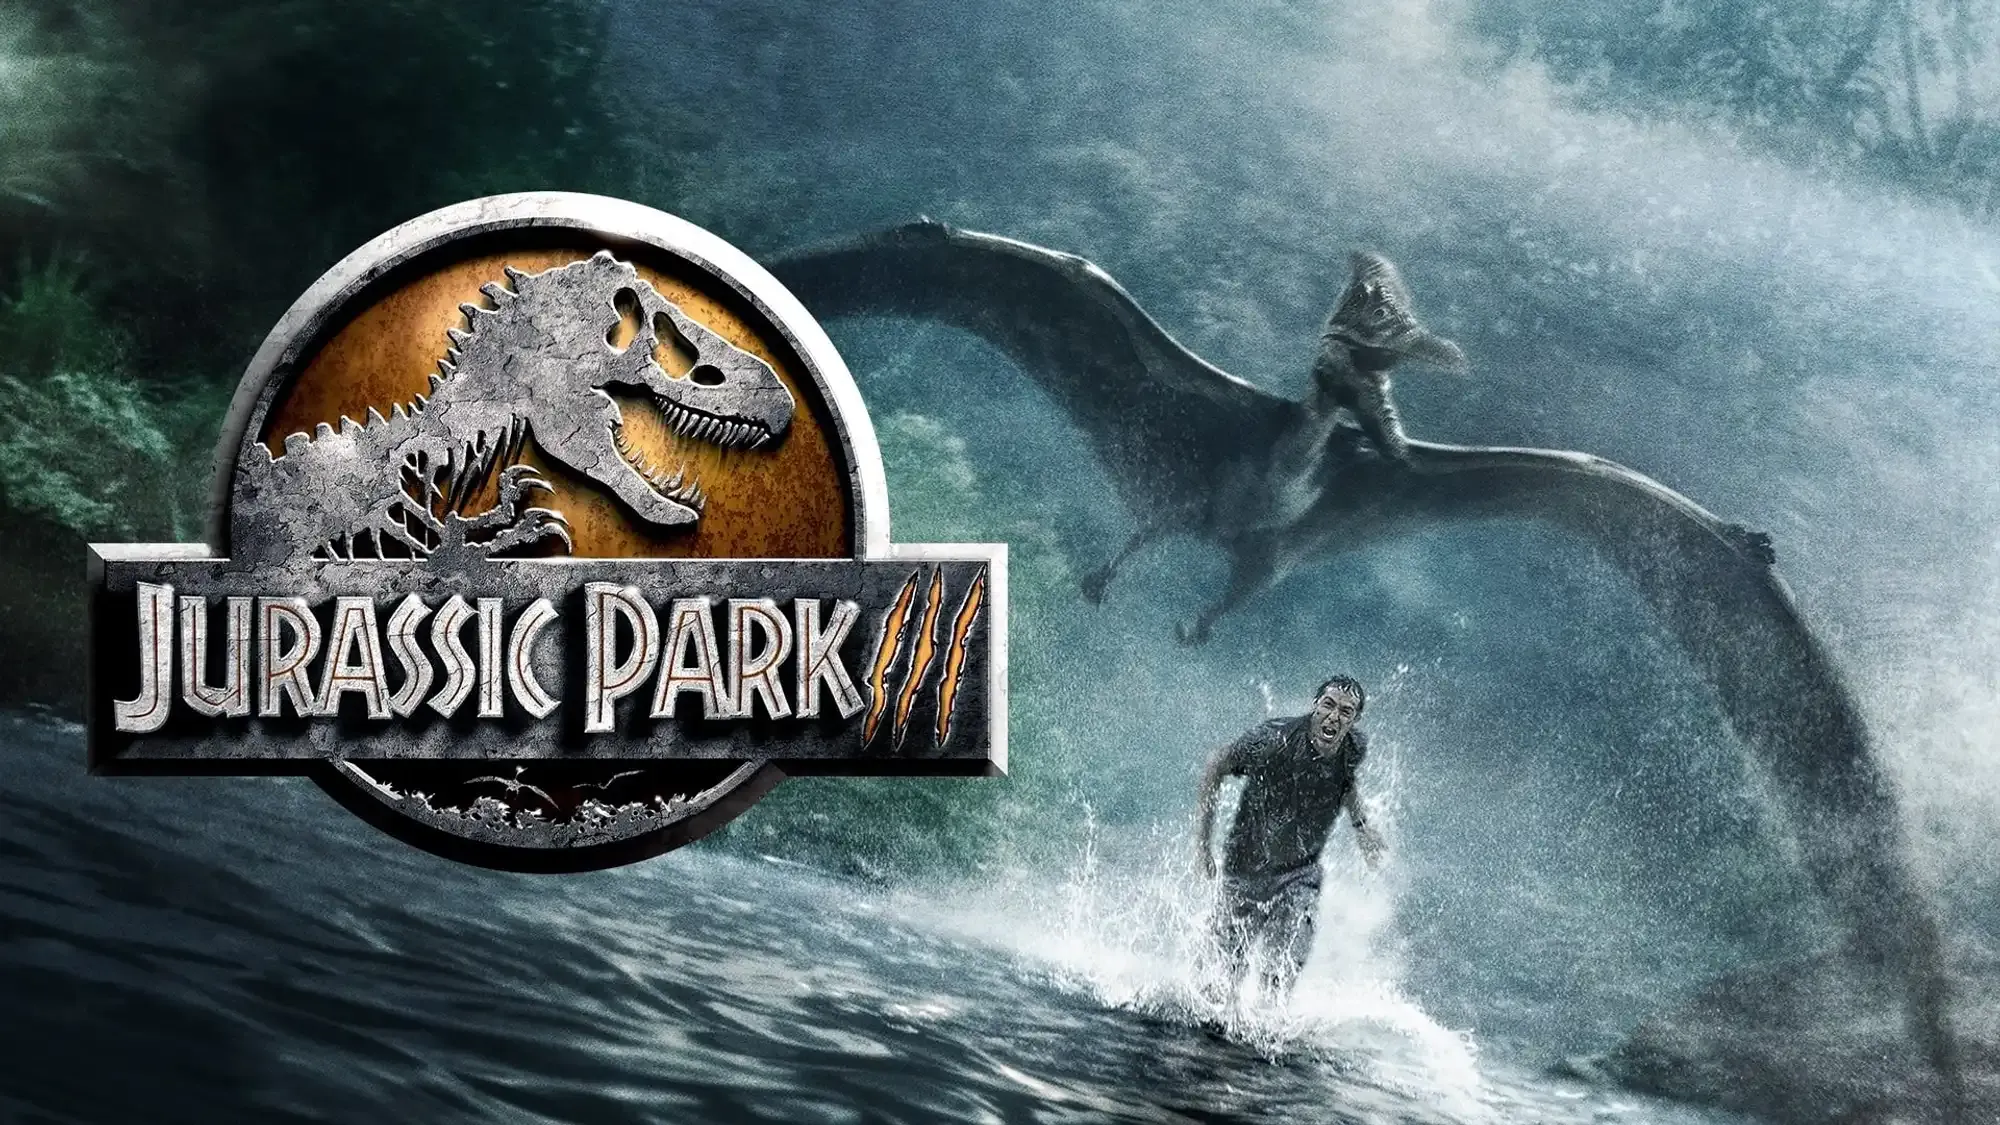 Jurassic Park III movie review